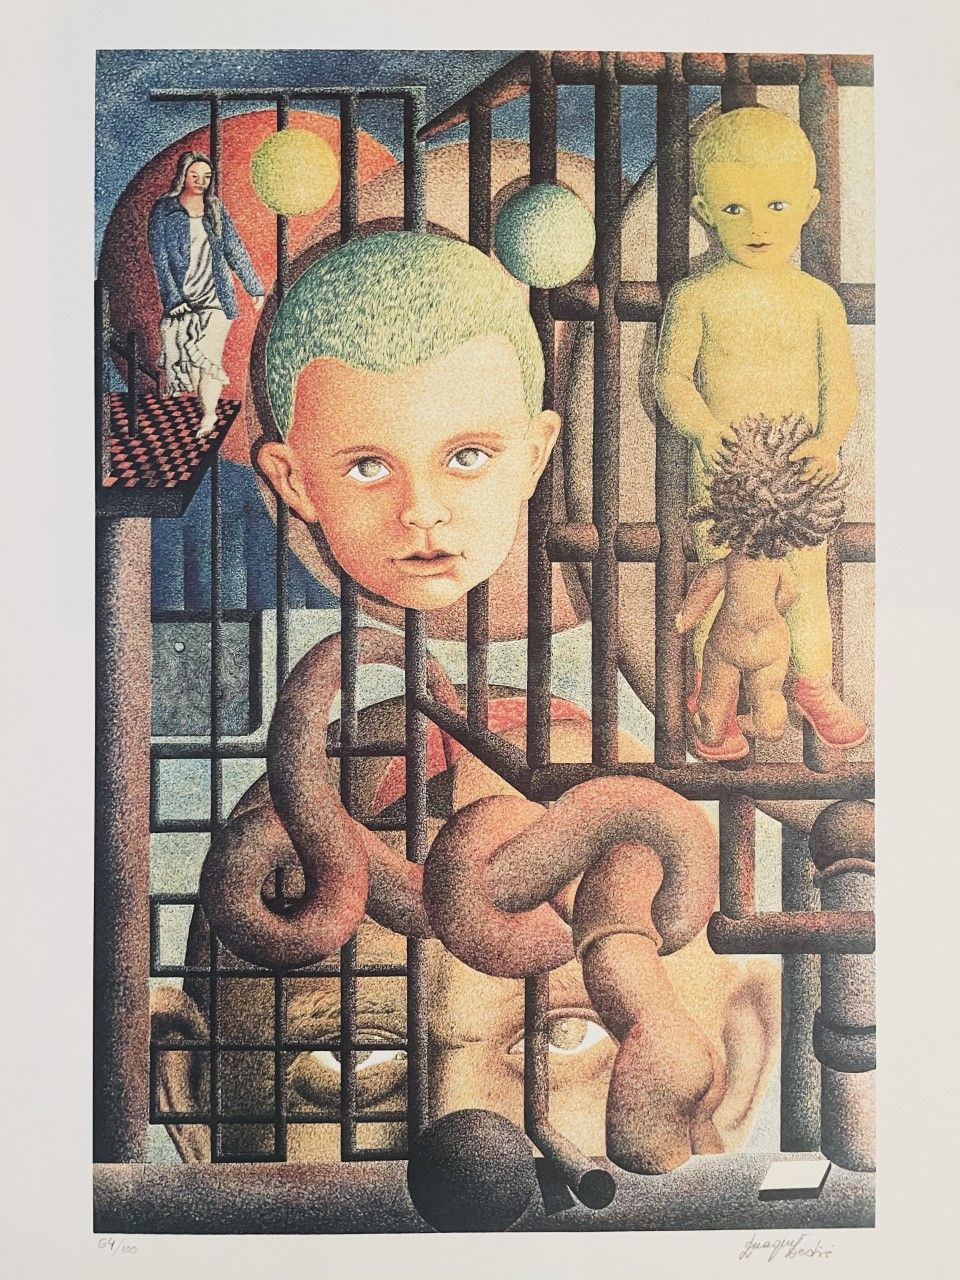 Drago DEDIC (1937 - ) Lithography "L'ENFANT "Signed in pencil on the lower right&hellip;